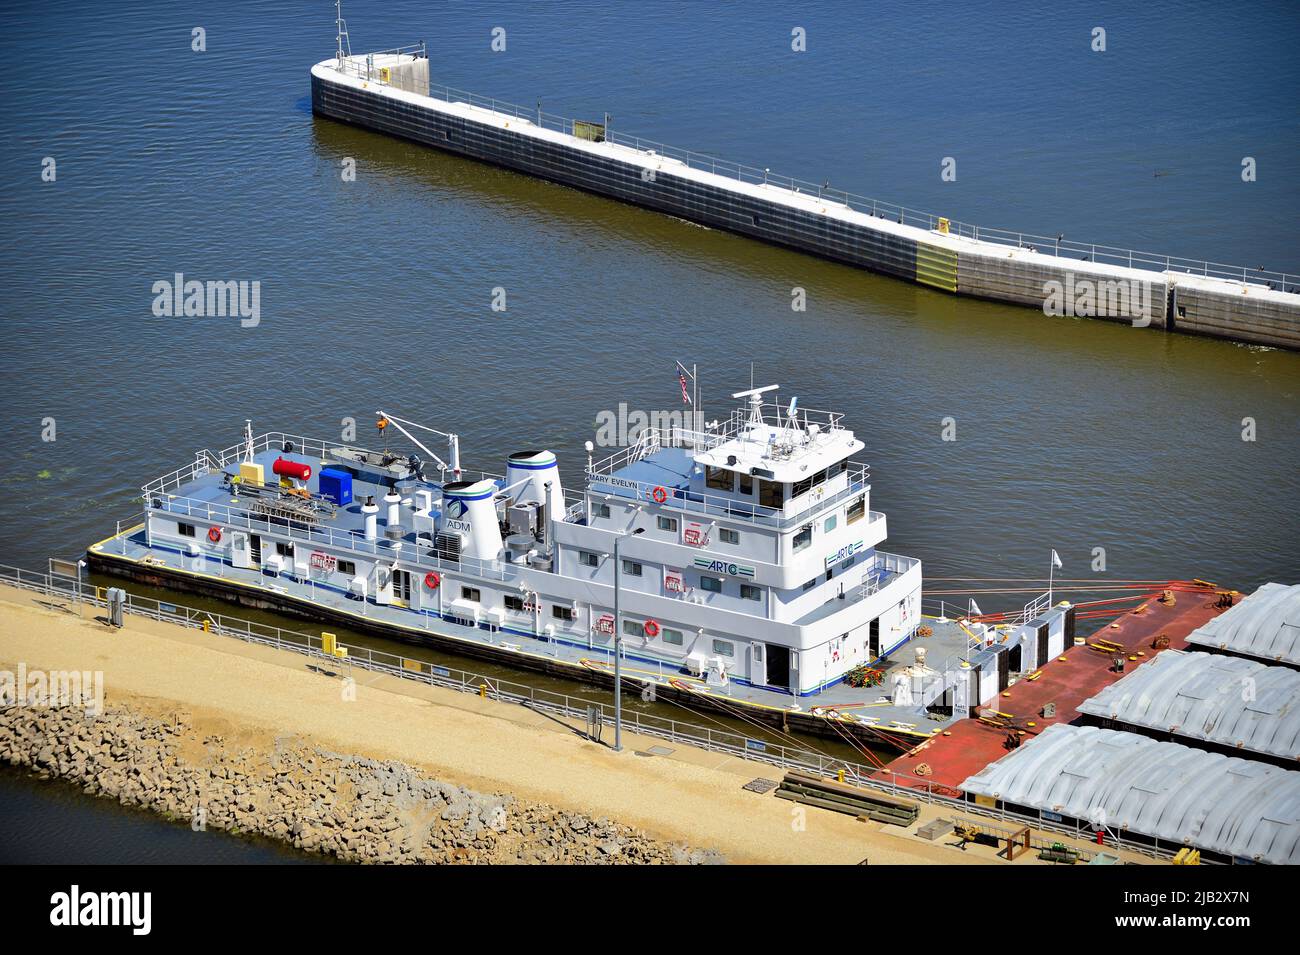 Dubuque, Iowa, USA. Tug boat pushing barges to pass through the channel at Lock and Dam #11 on the Mississippi River. Stock Photo